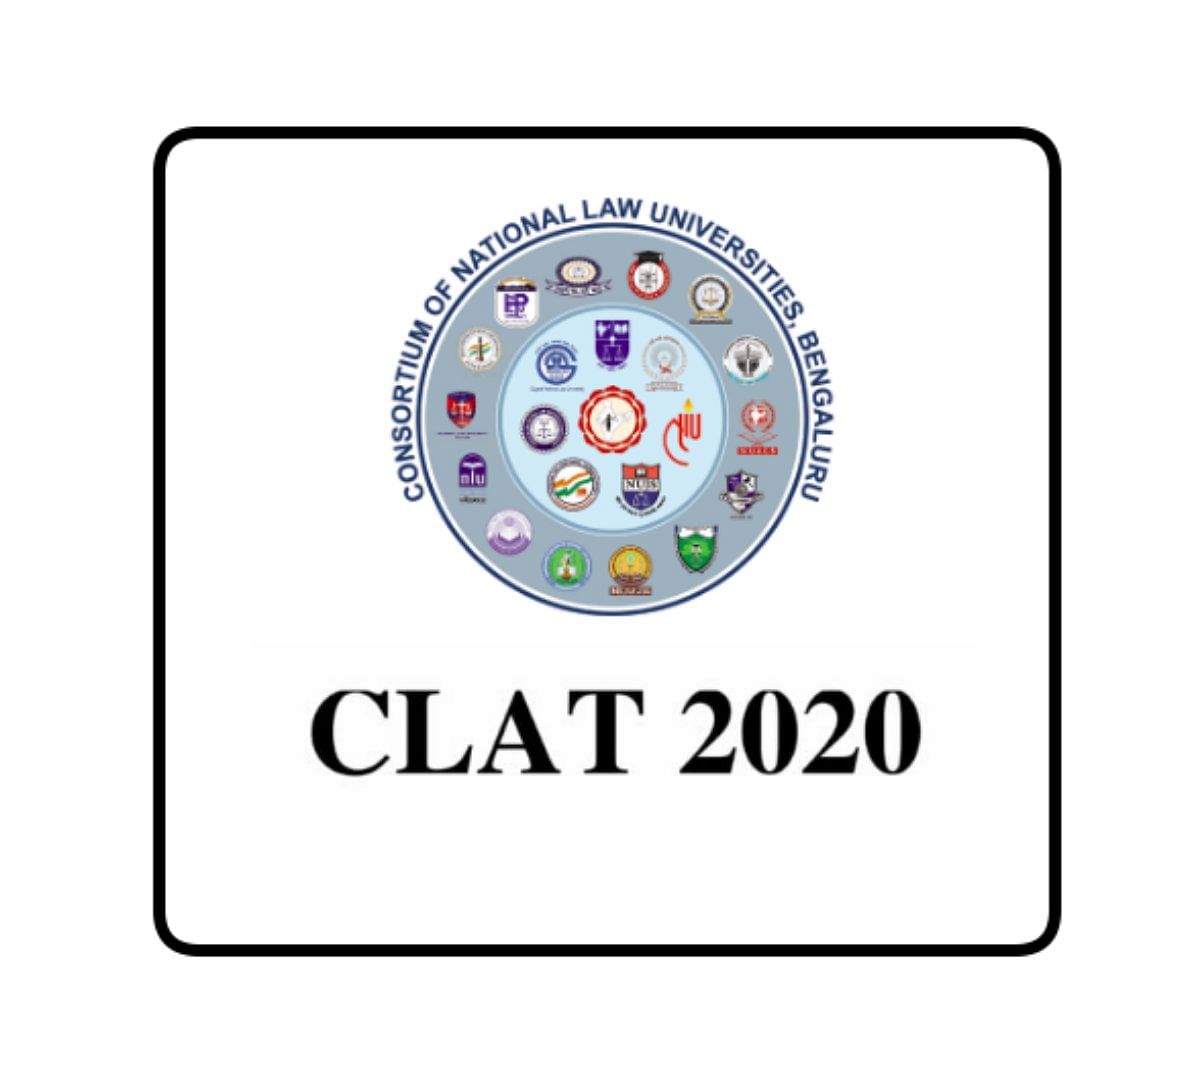 CLAT 2020: Application Process To End in 4 Days, Know Details